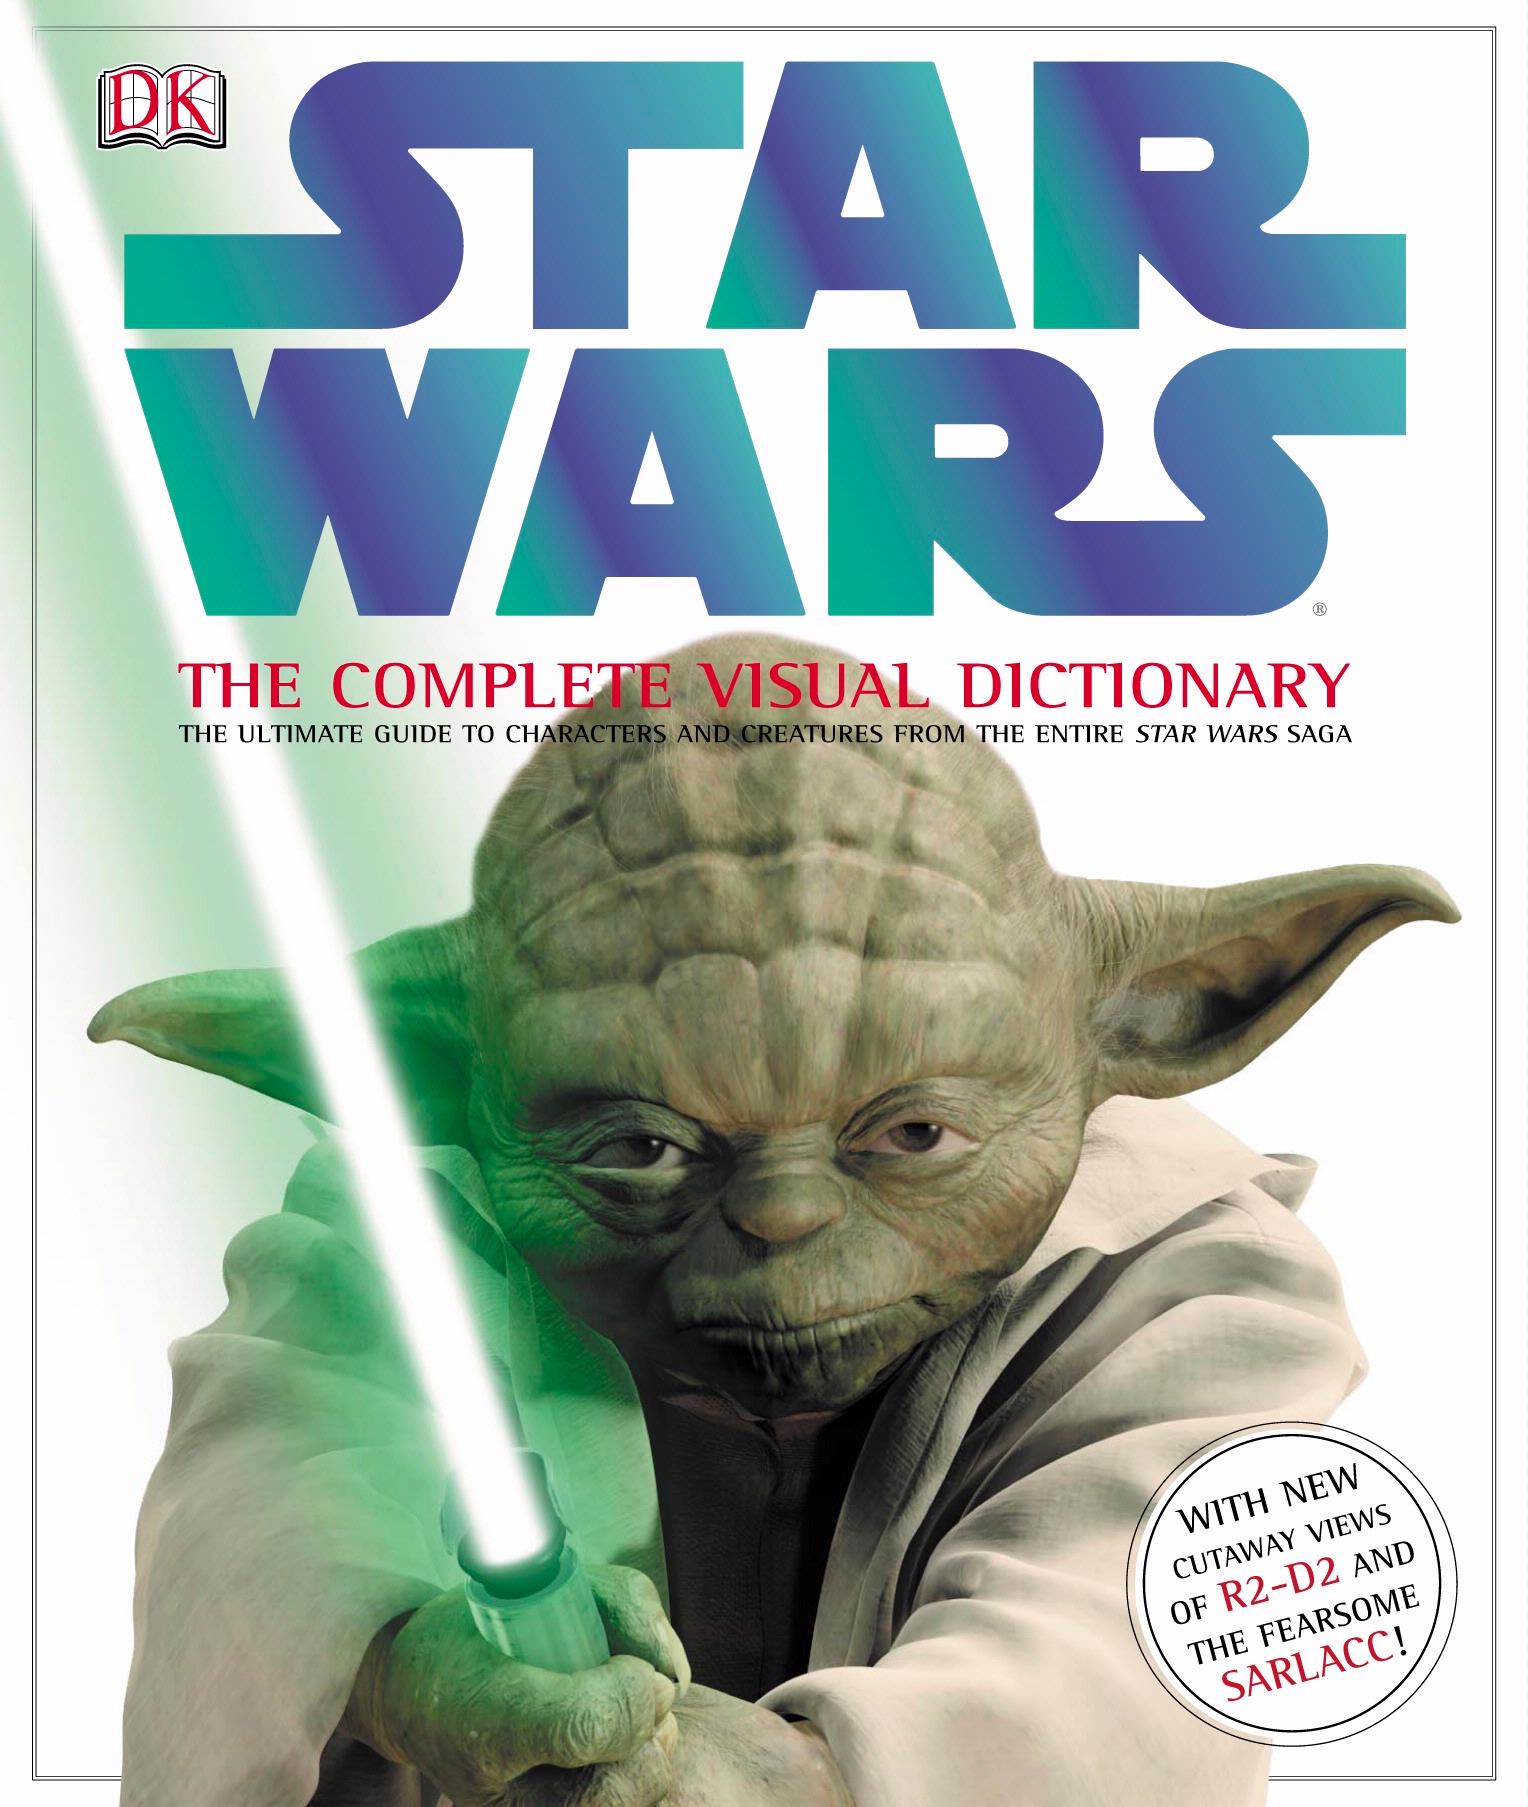 The Complete Visual Dictionary